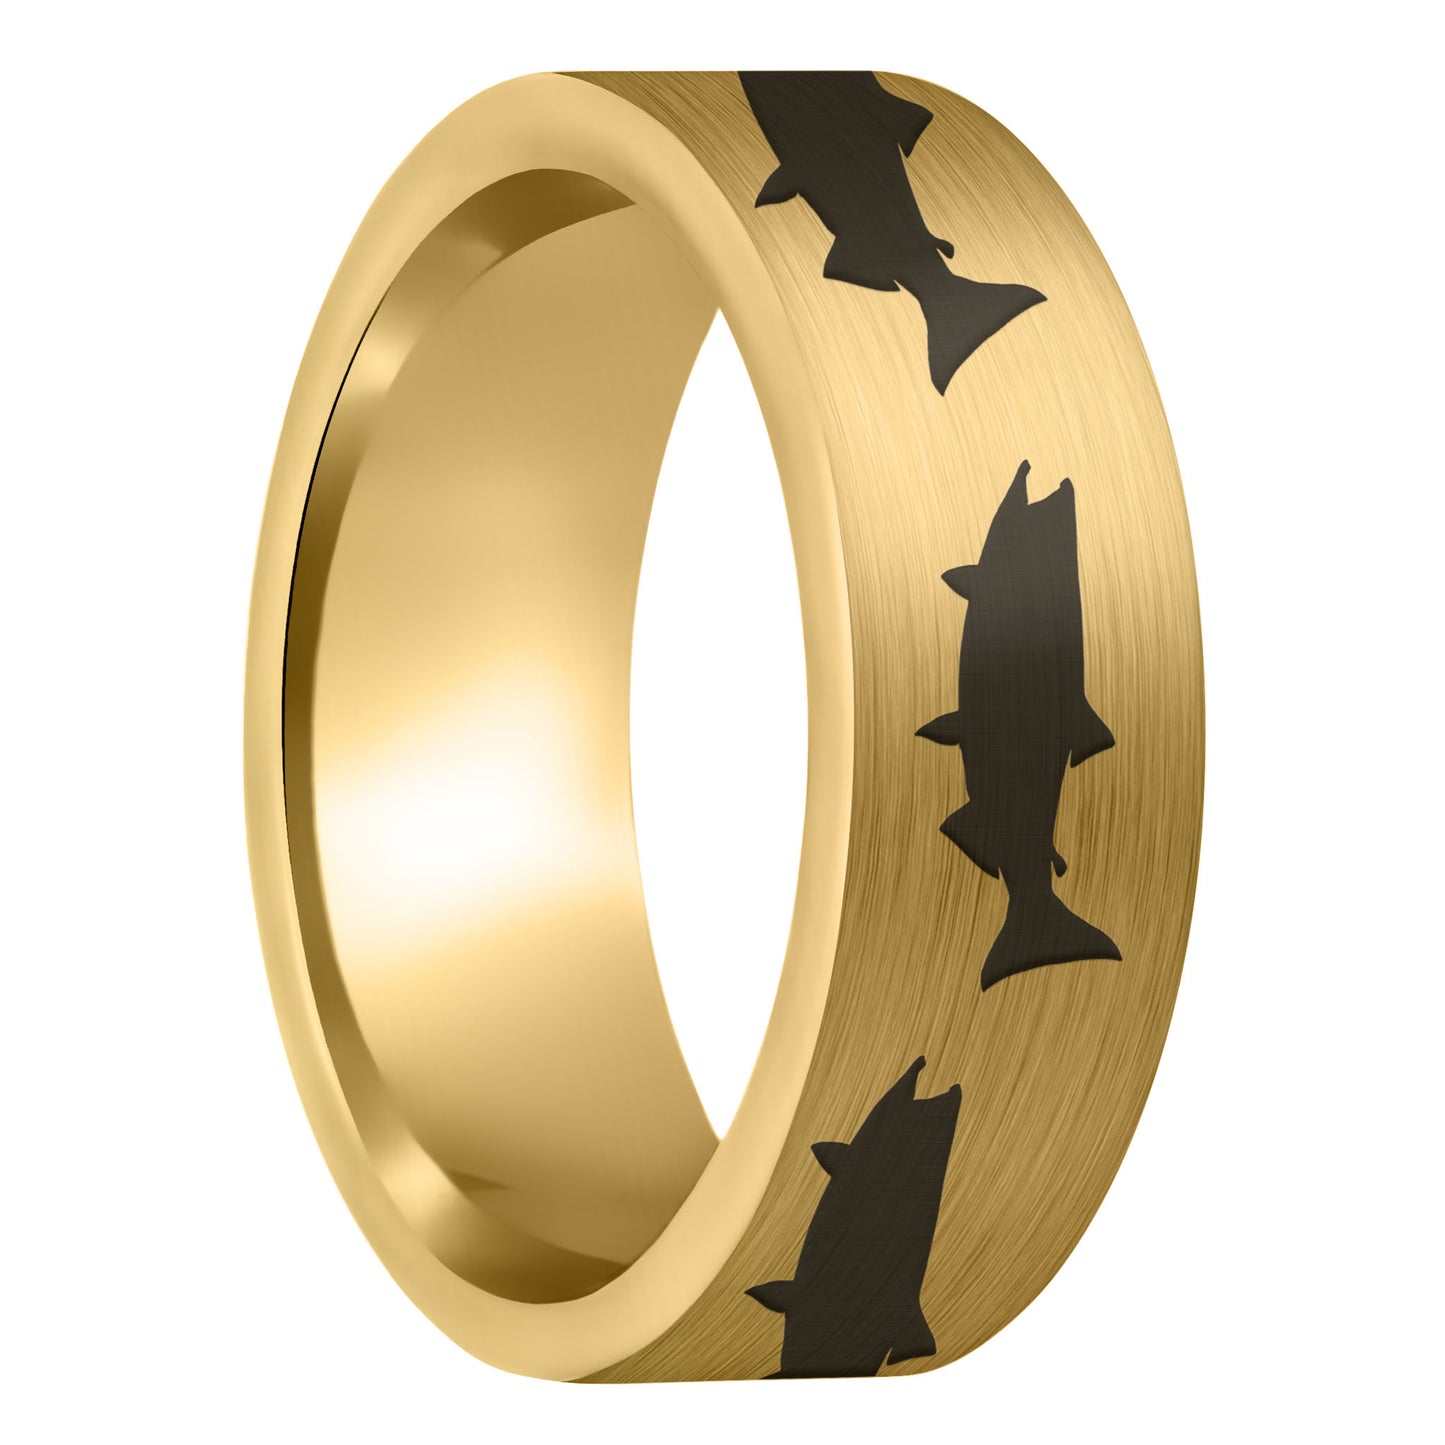 A salmon fish brushed gold tungsten men's wedding band displayed on a plain white background.